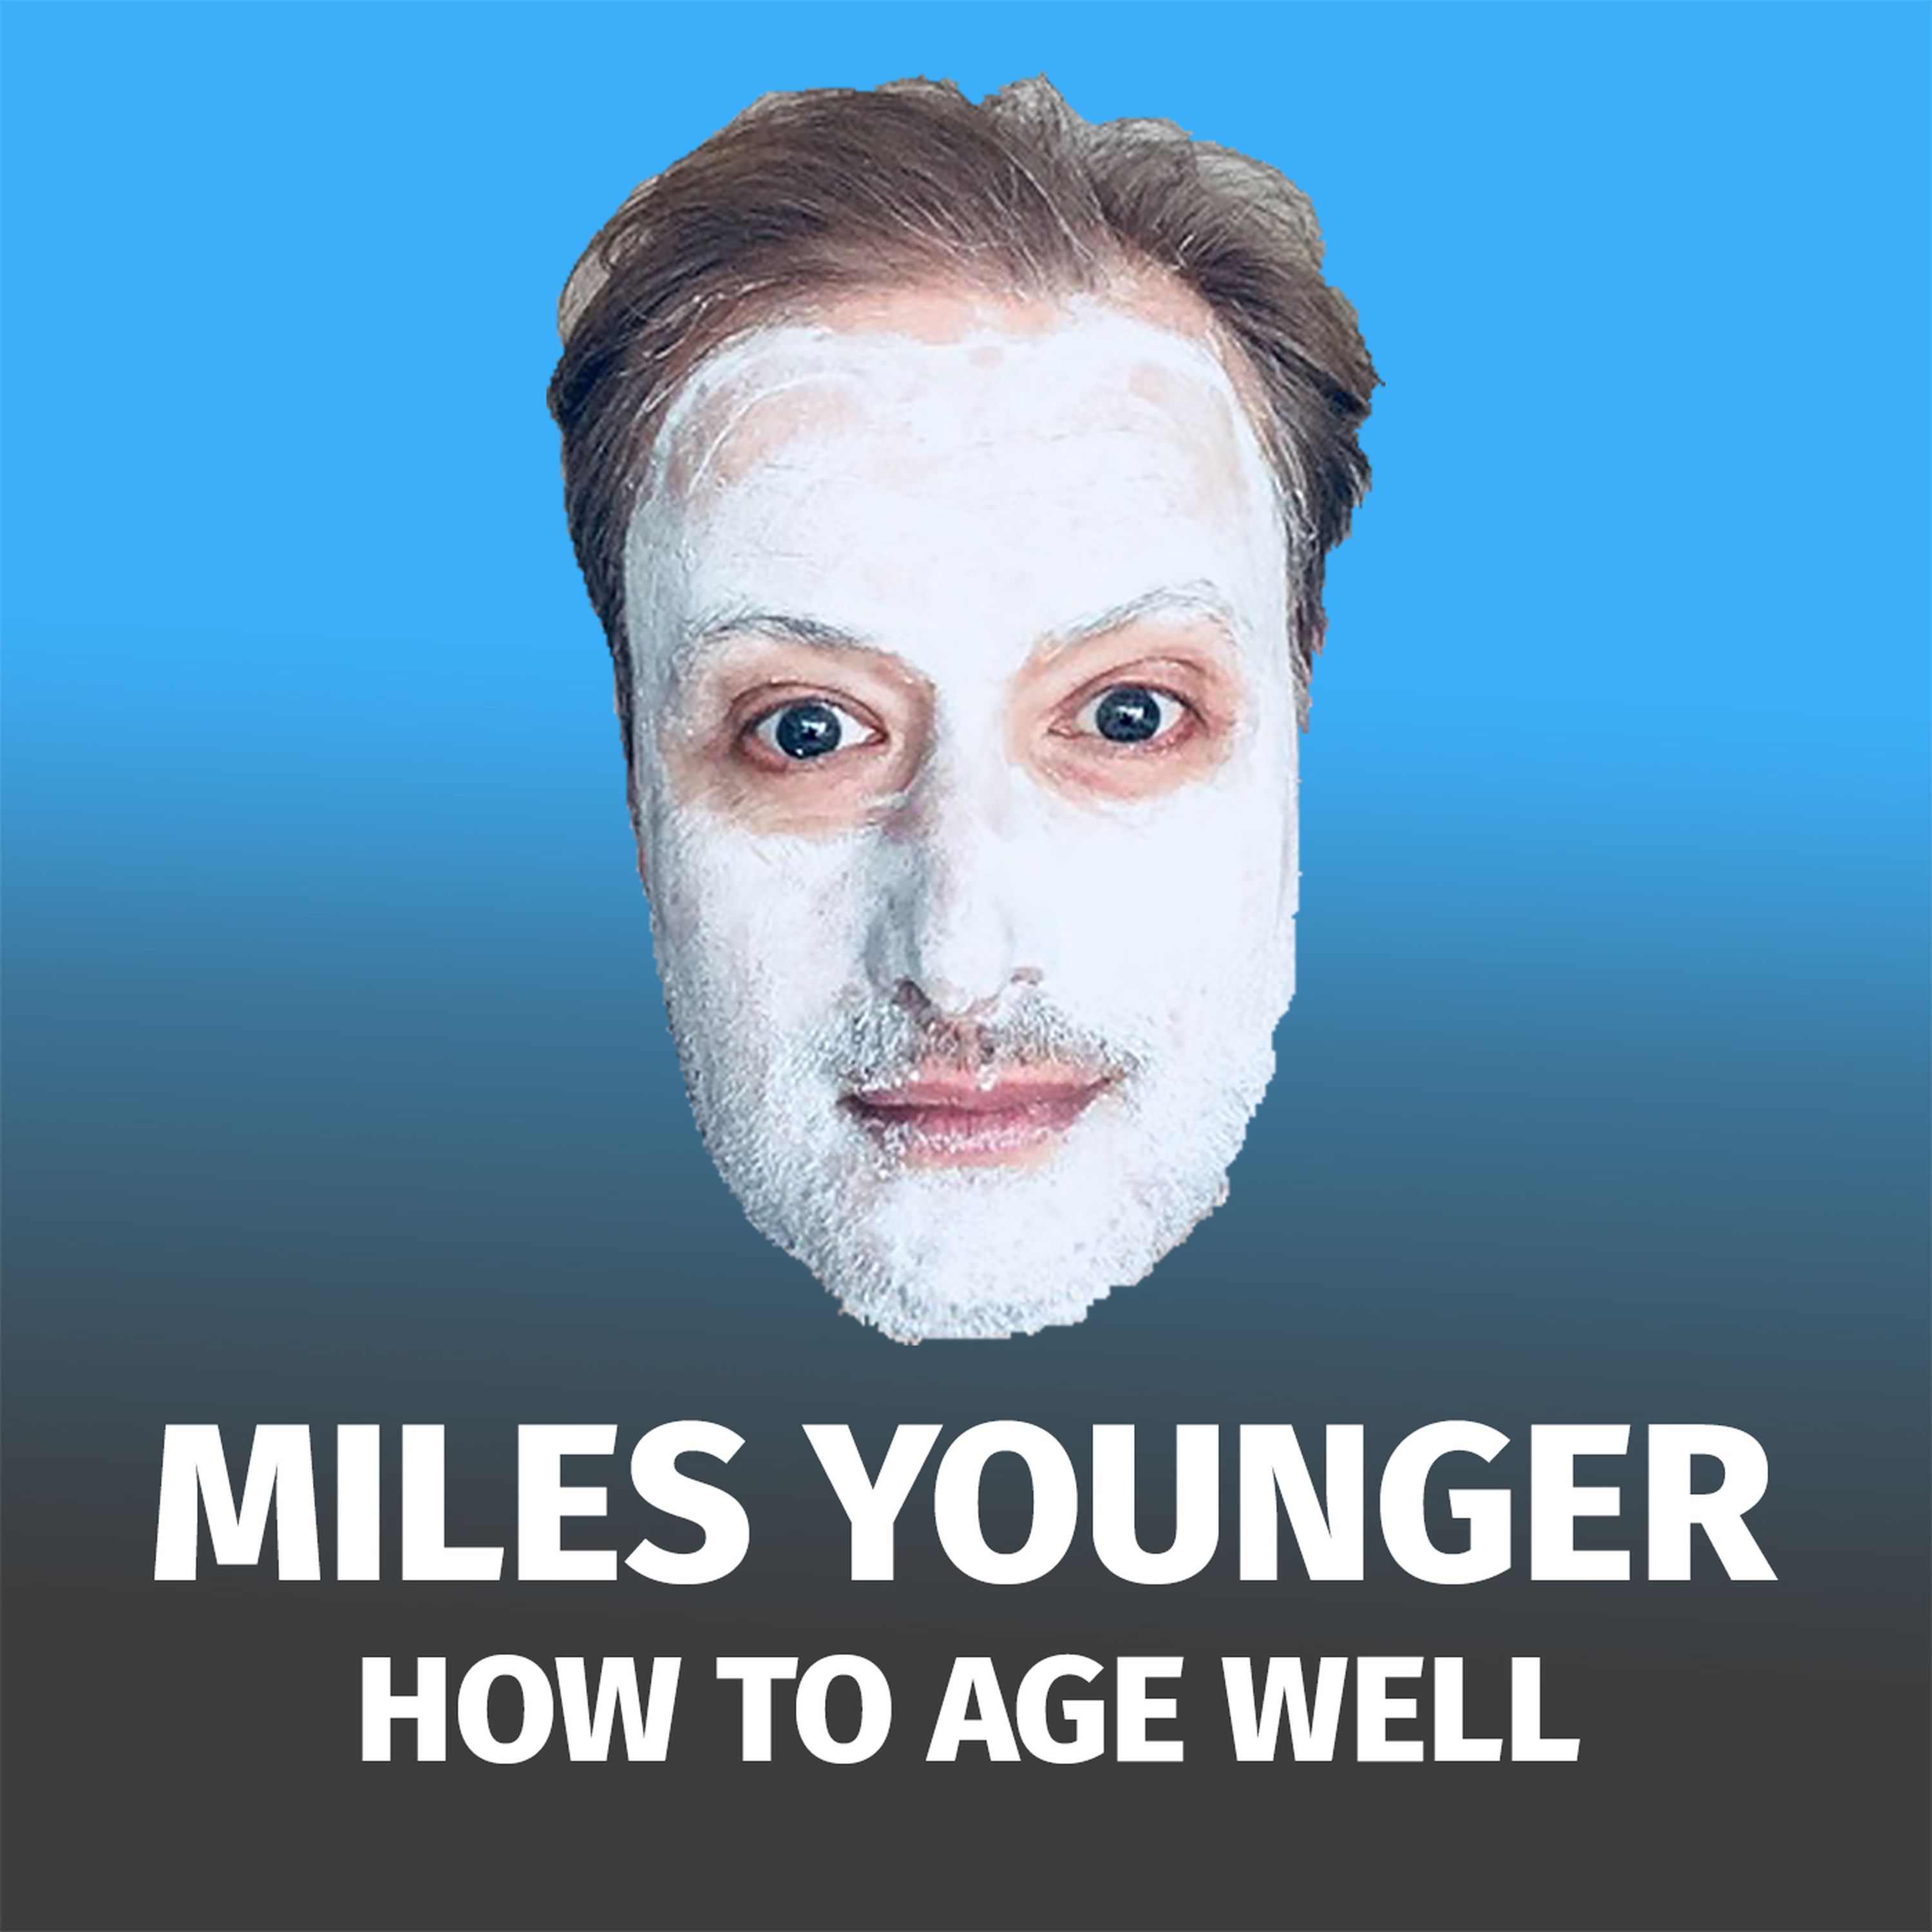 Miles Younger - How to Age Well - Tom Rowley